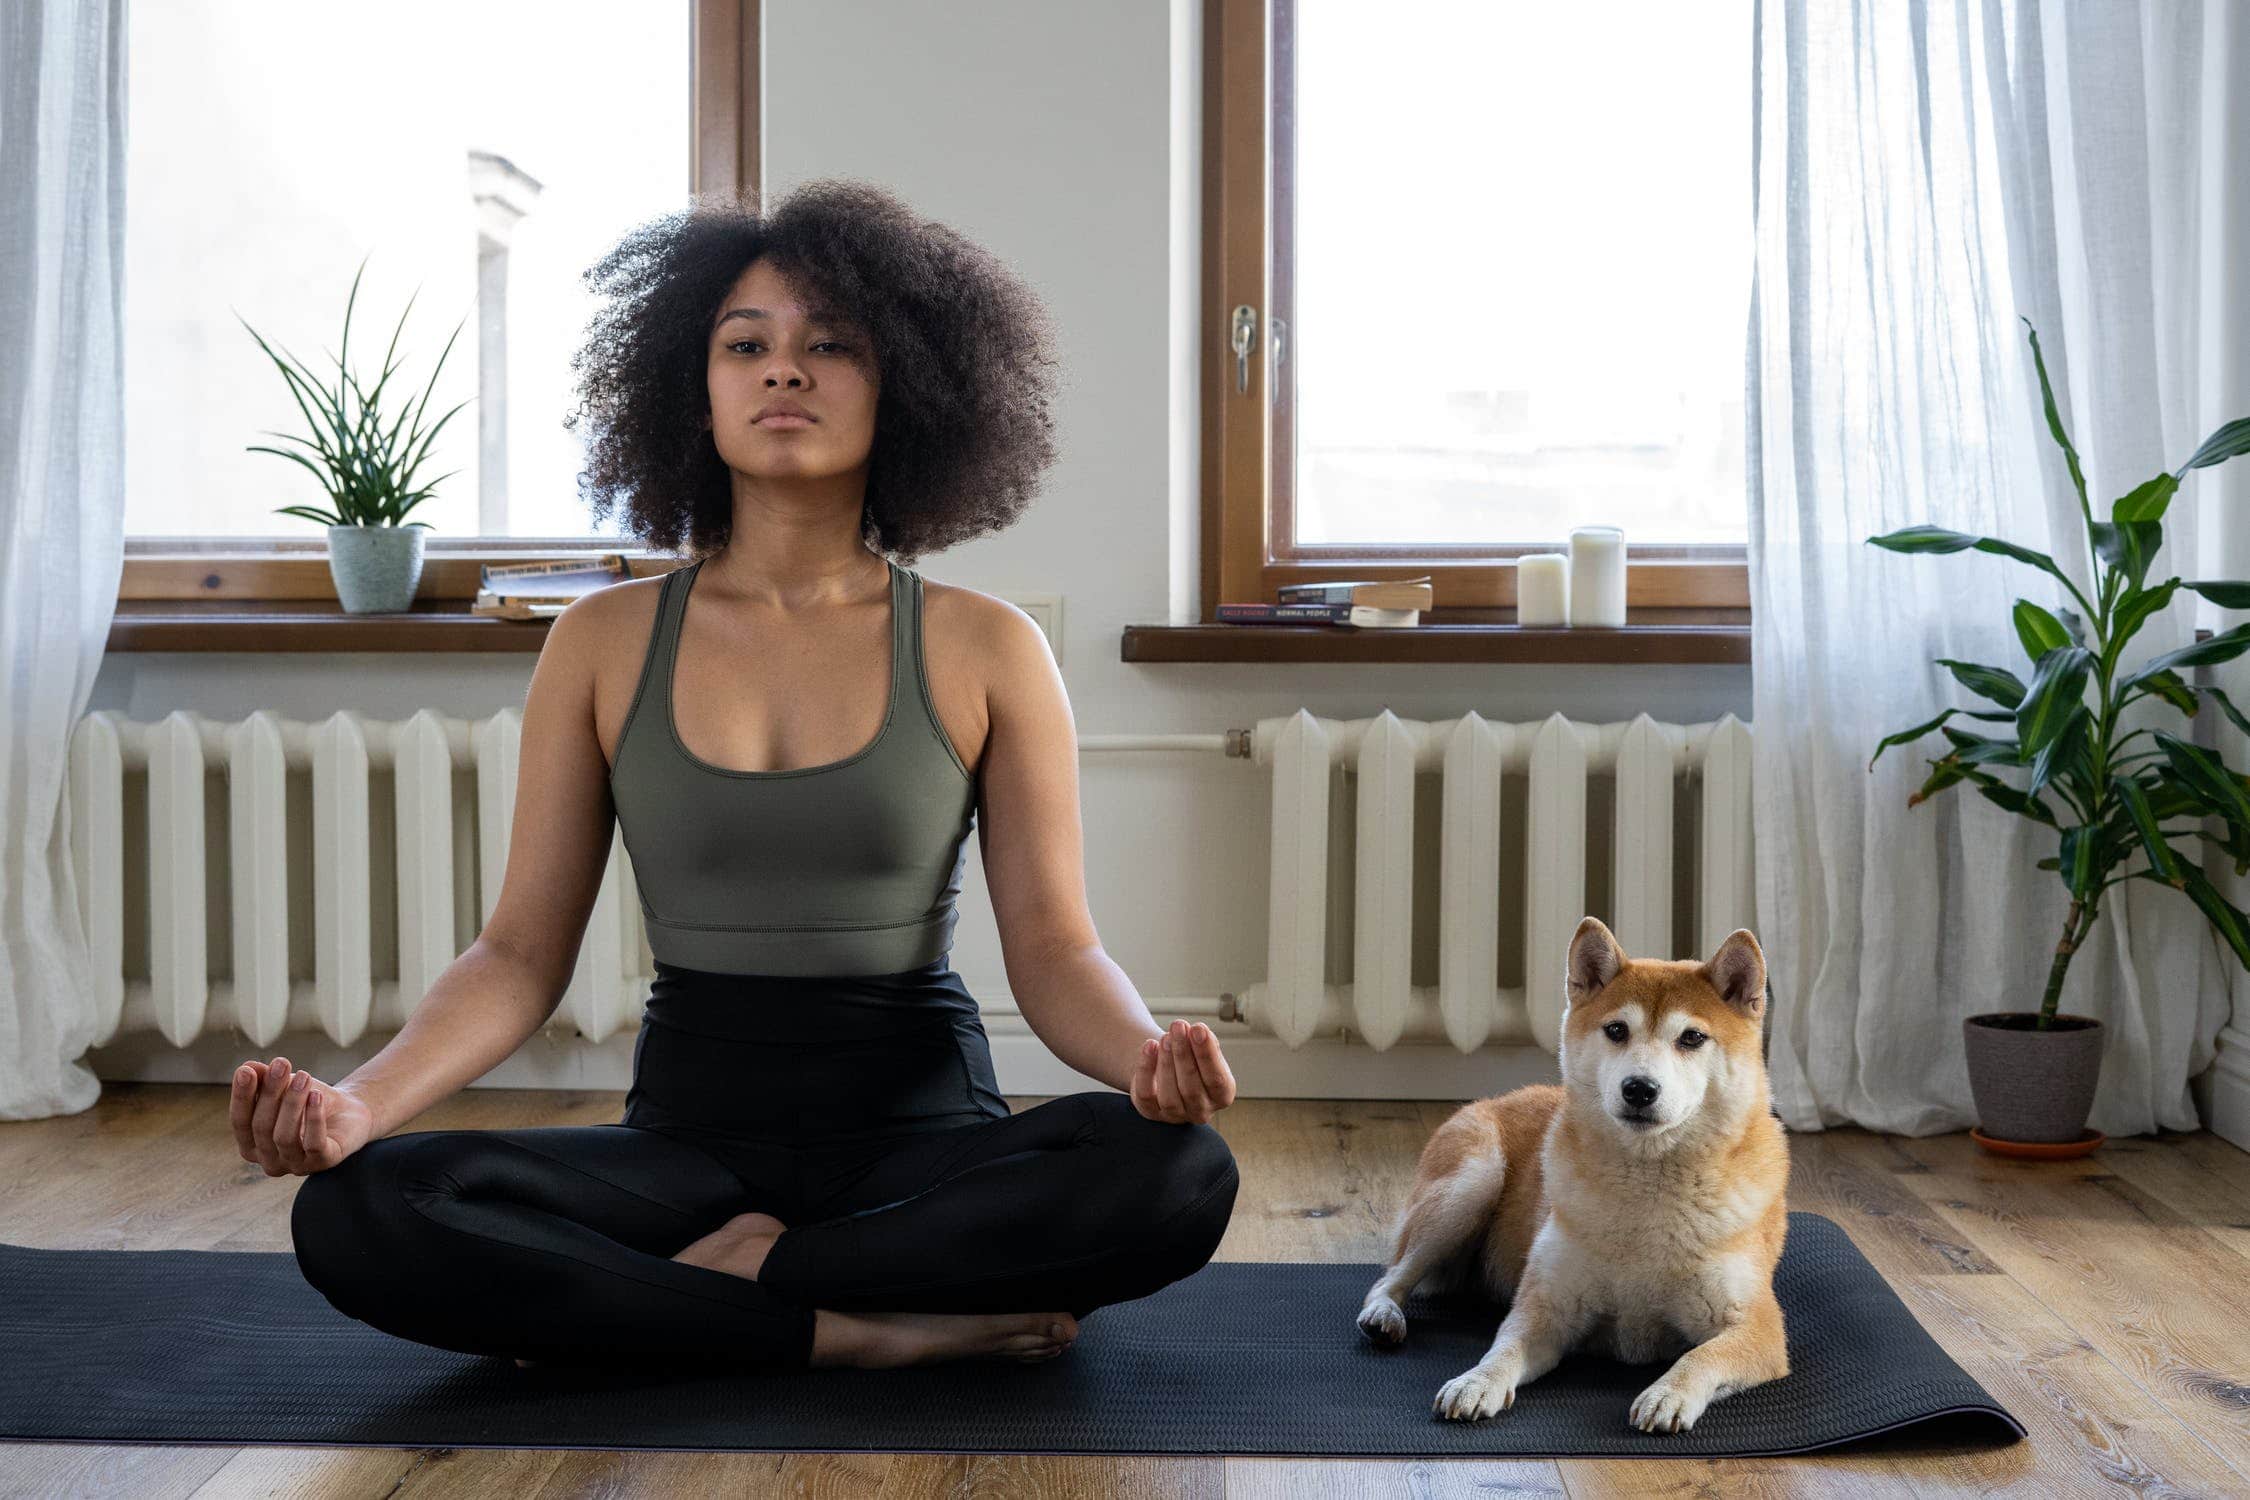 Young woman in a grounding yoga pose next to a dog